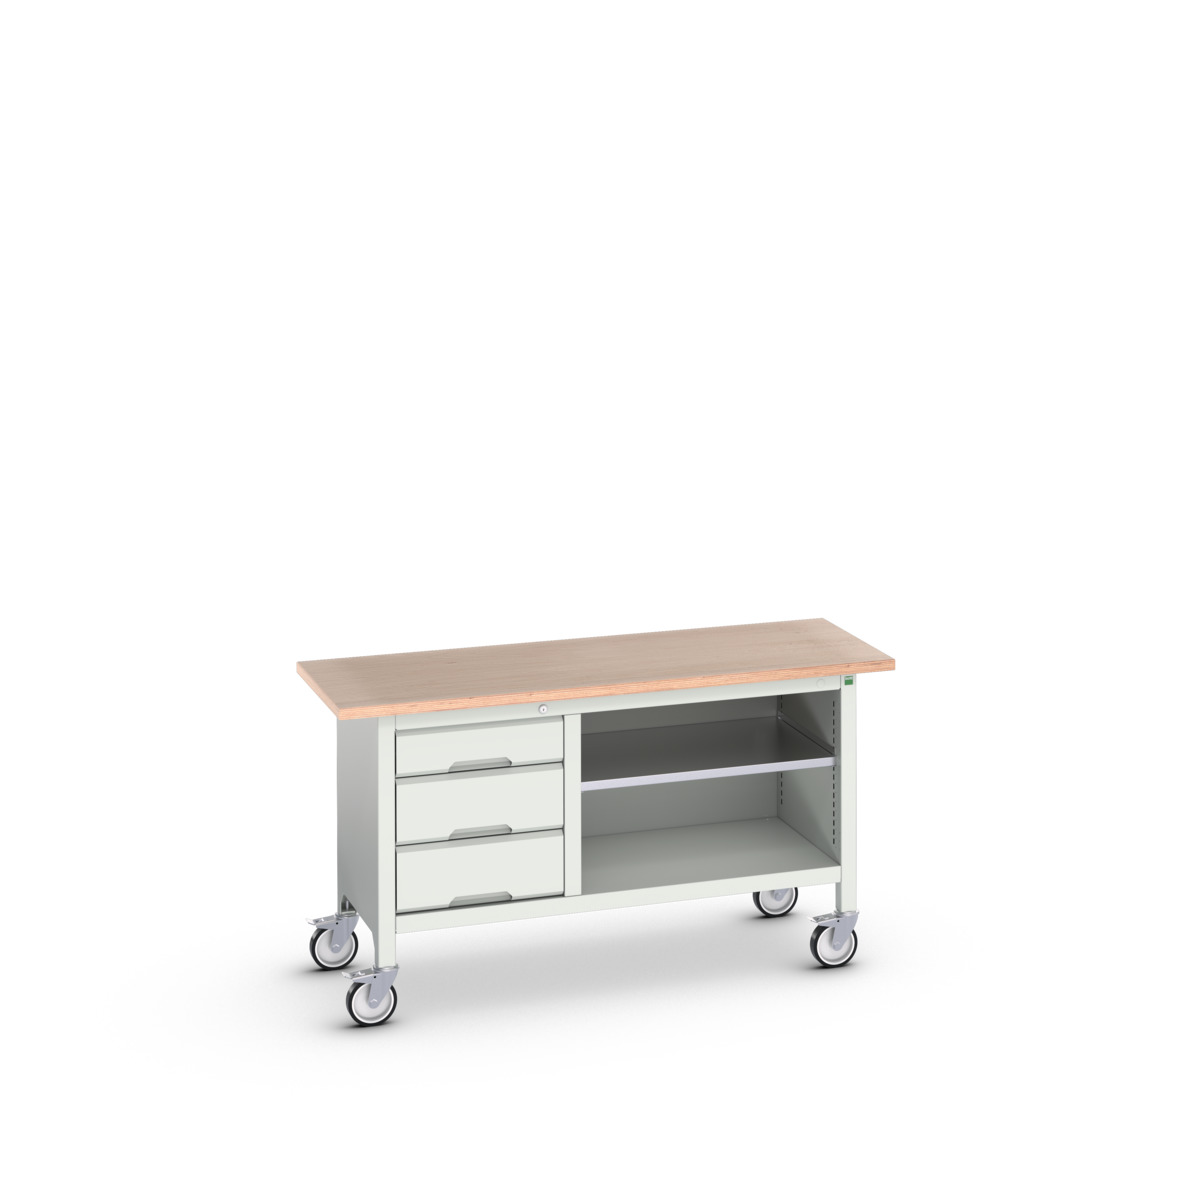 16923212.16 - verso mobile storage bench (mpx)